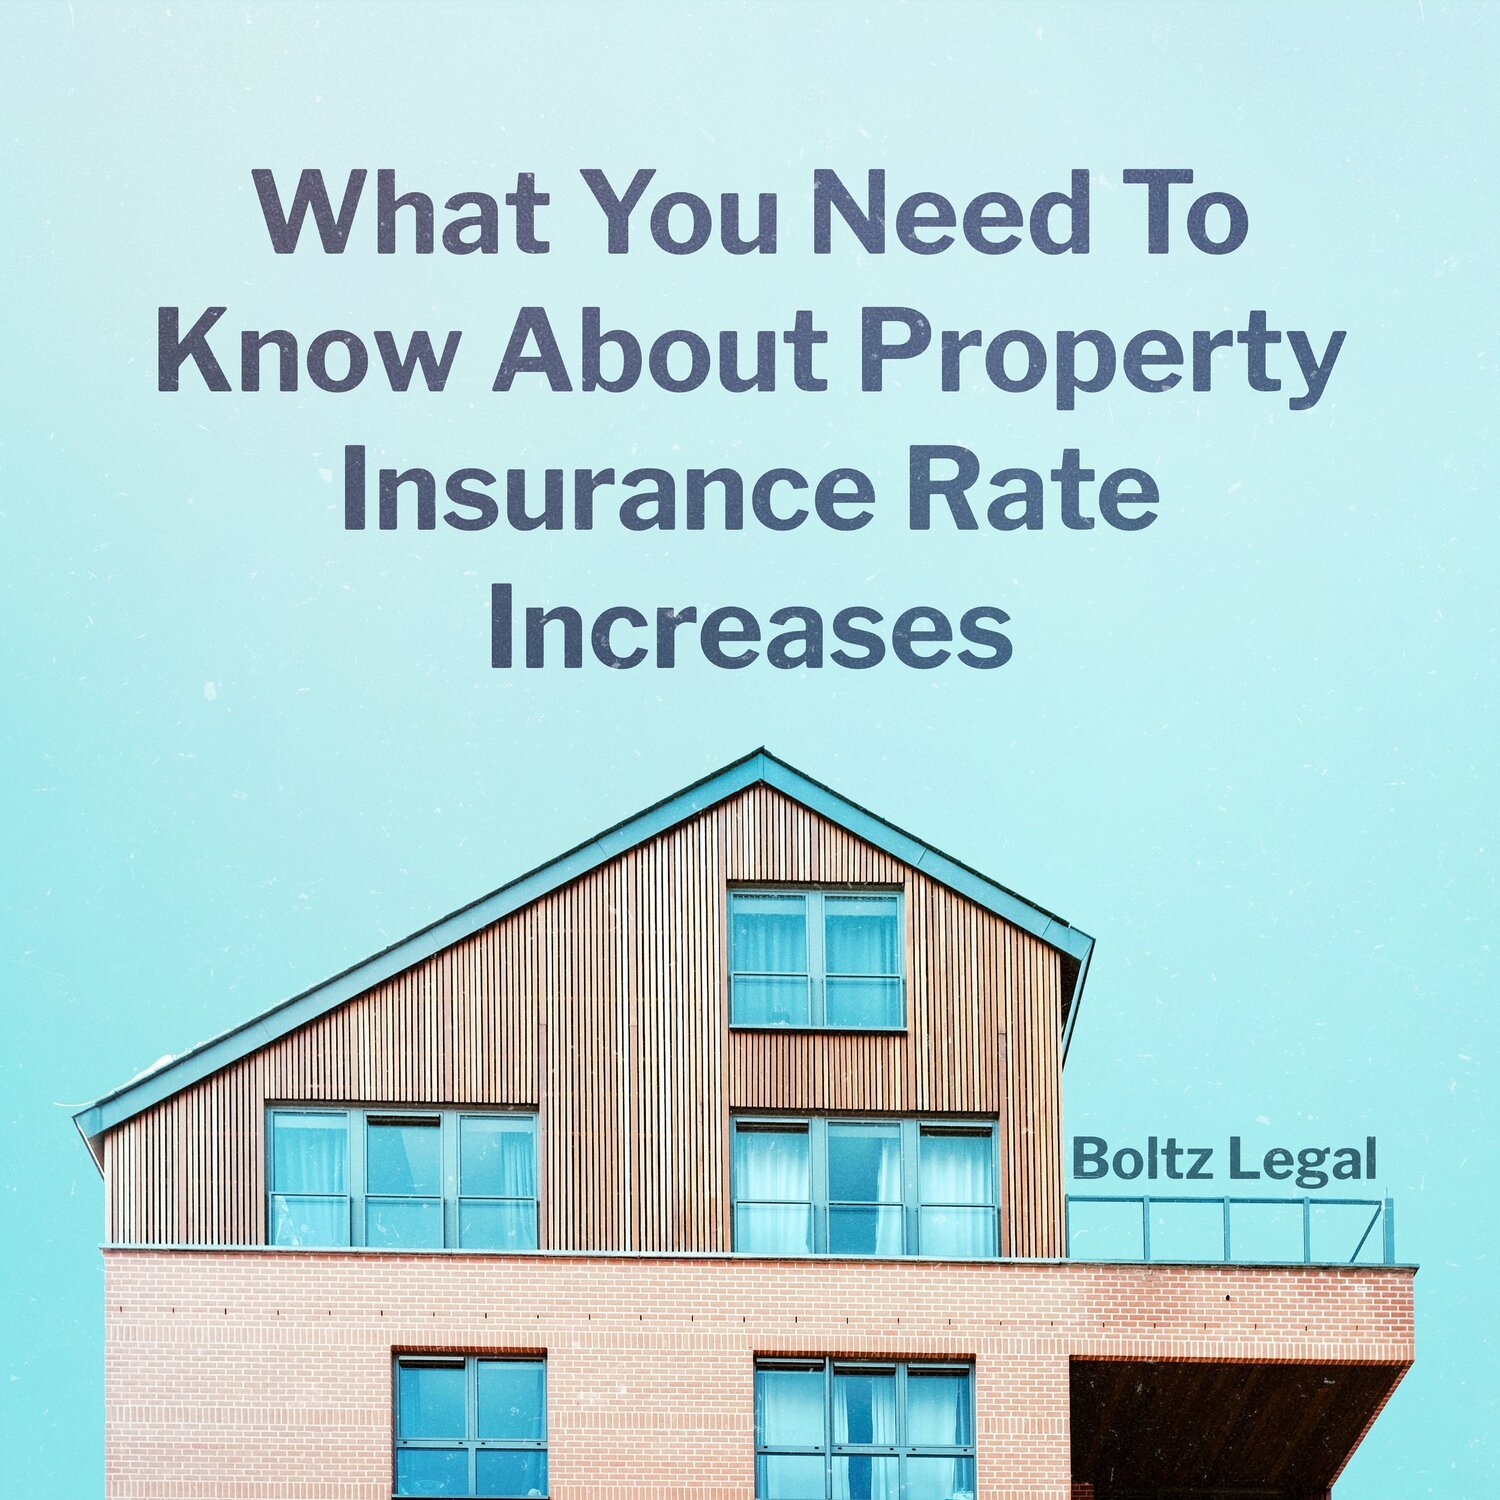 How much is residential builders liabilit insurance